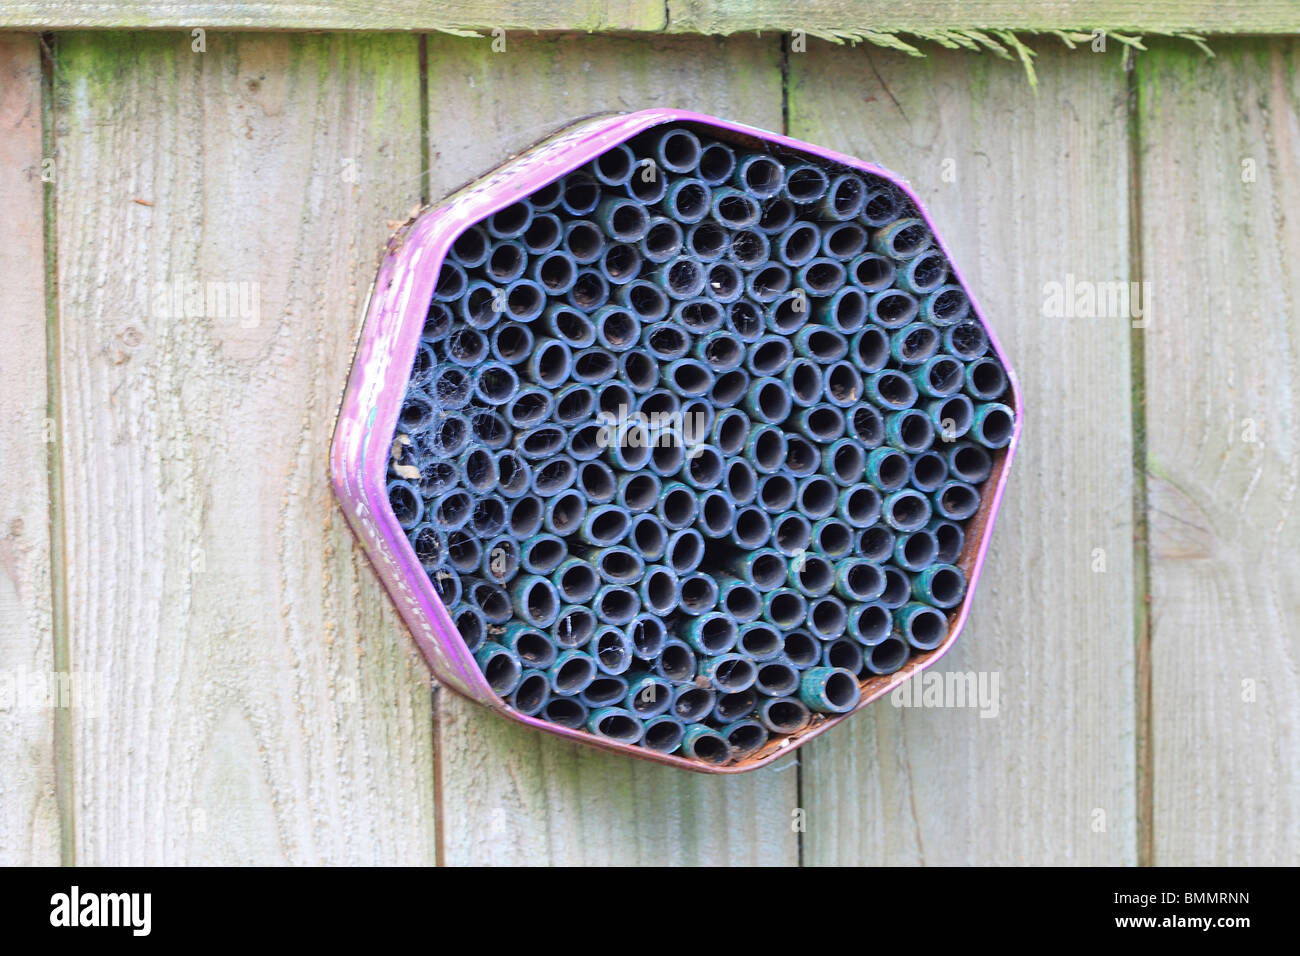 INSECT HIBERNATION SITE MADE FROM RECYCLED MATERIALS Stock Photo